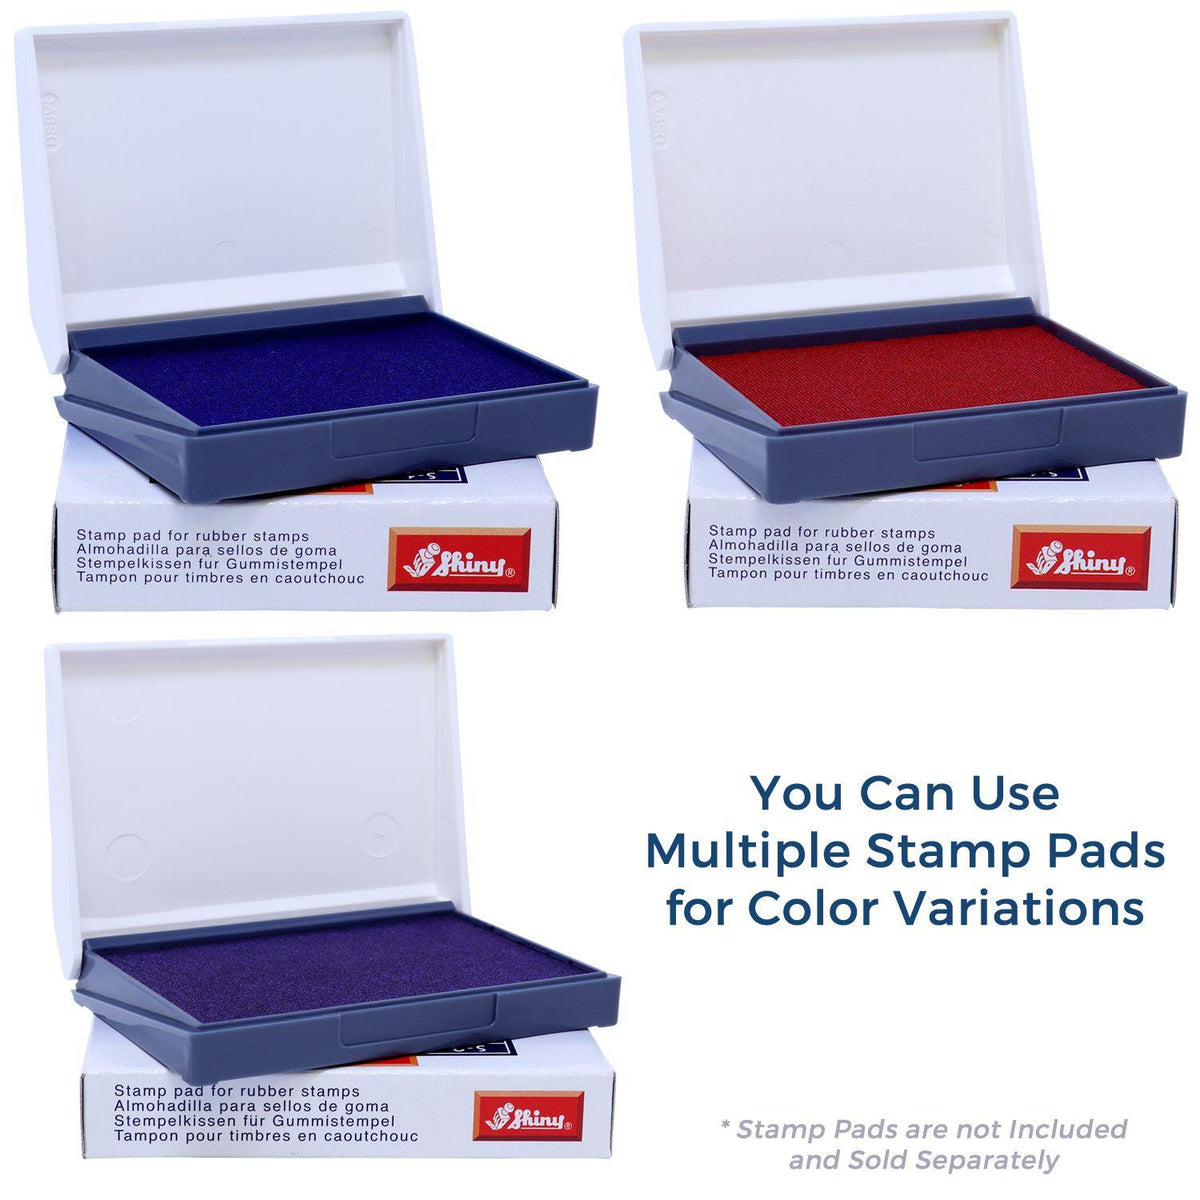 Stamp Pads for Large SAM Rubber Stamp Available